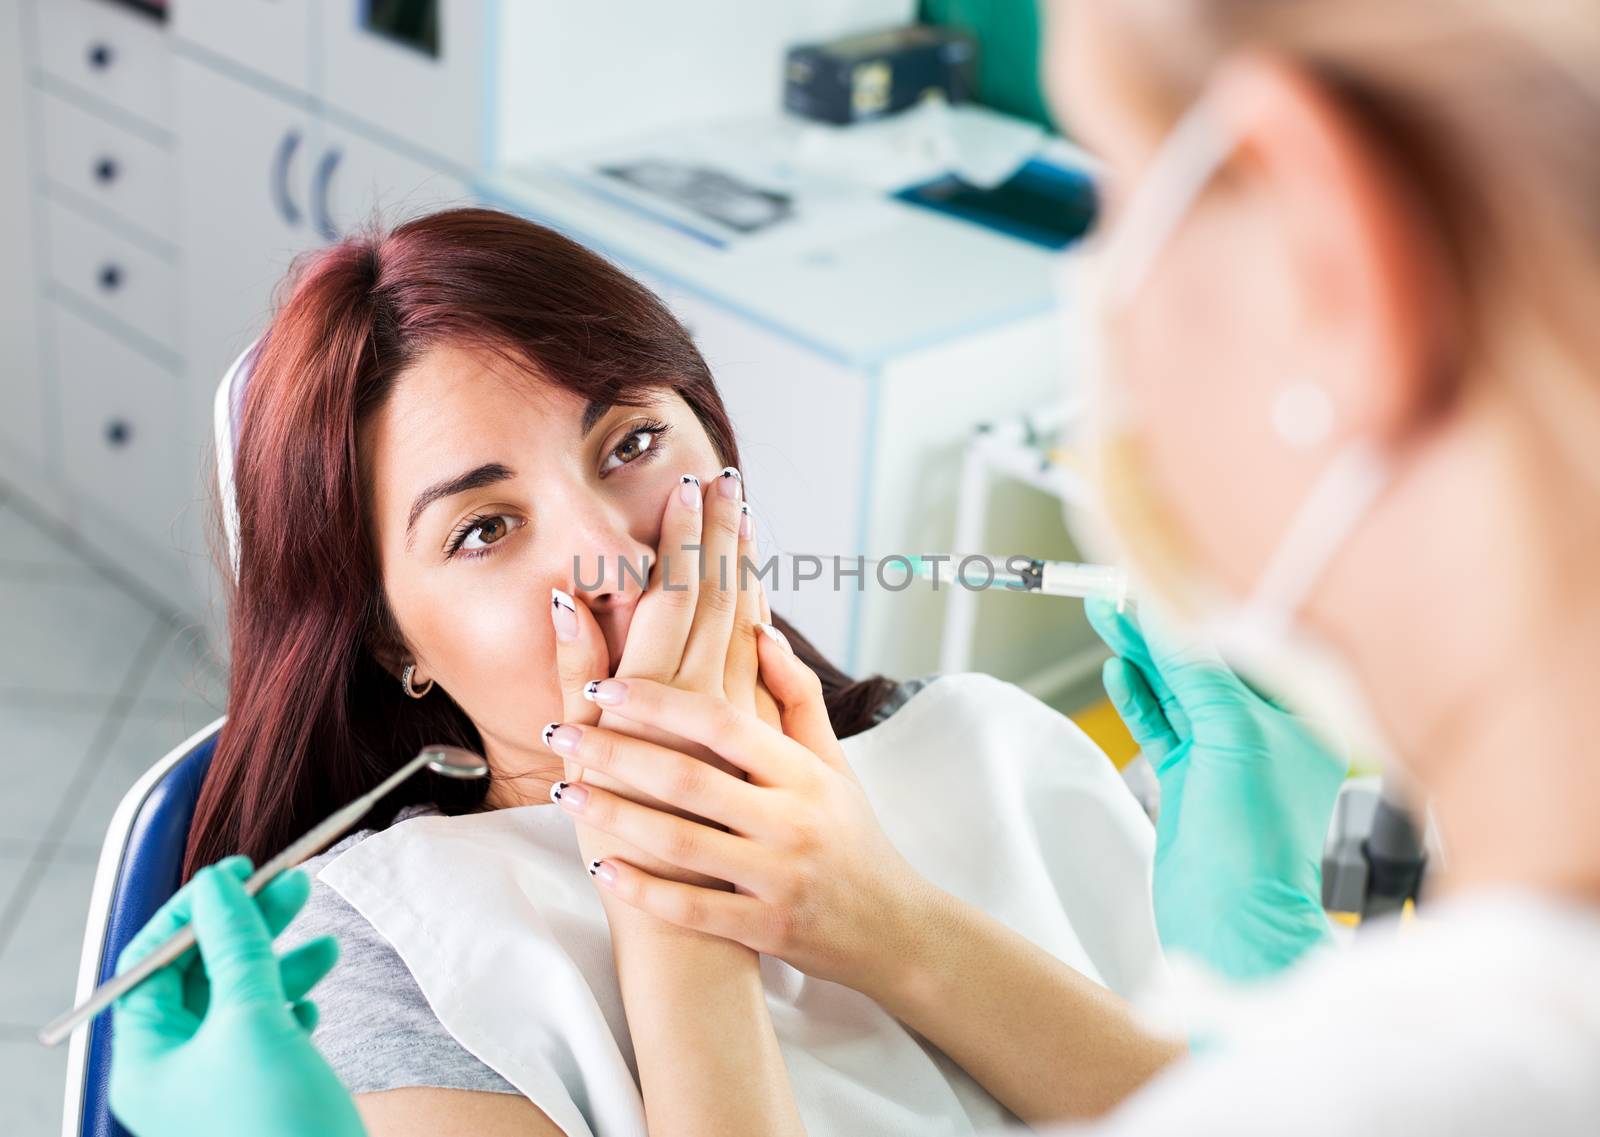 Young female dentist giving anesthesia to the patient before dental surgery. The patient in fear holds hands over mouth. Selective focus, focus on the patient.